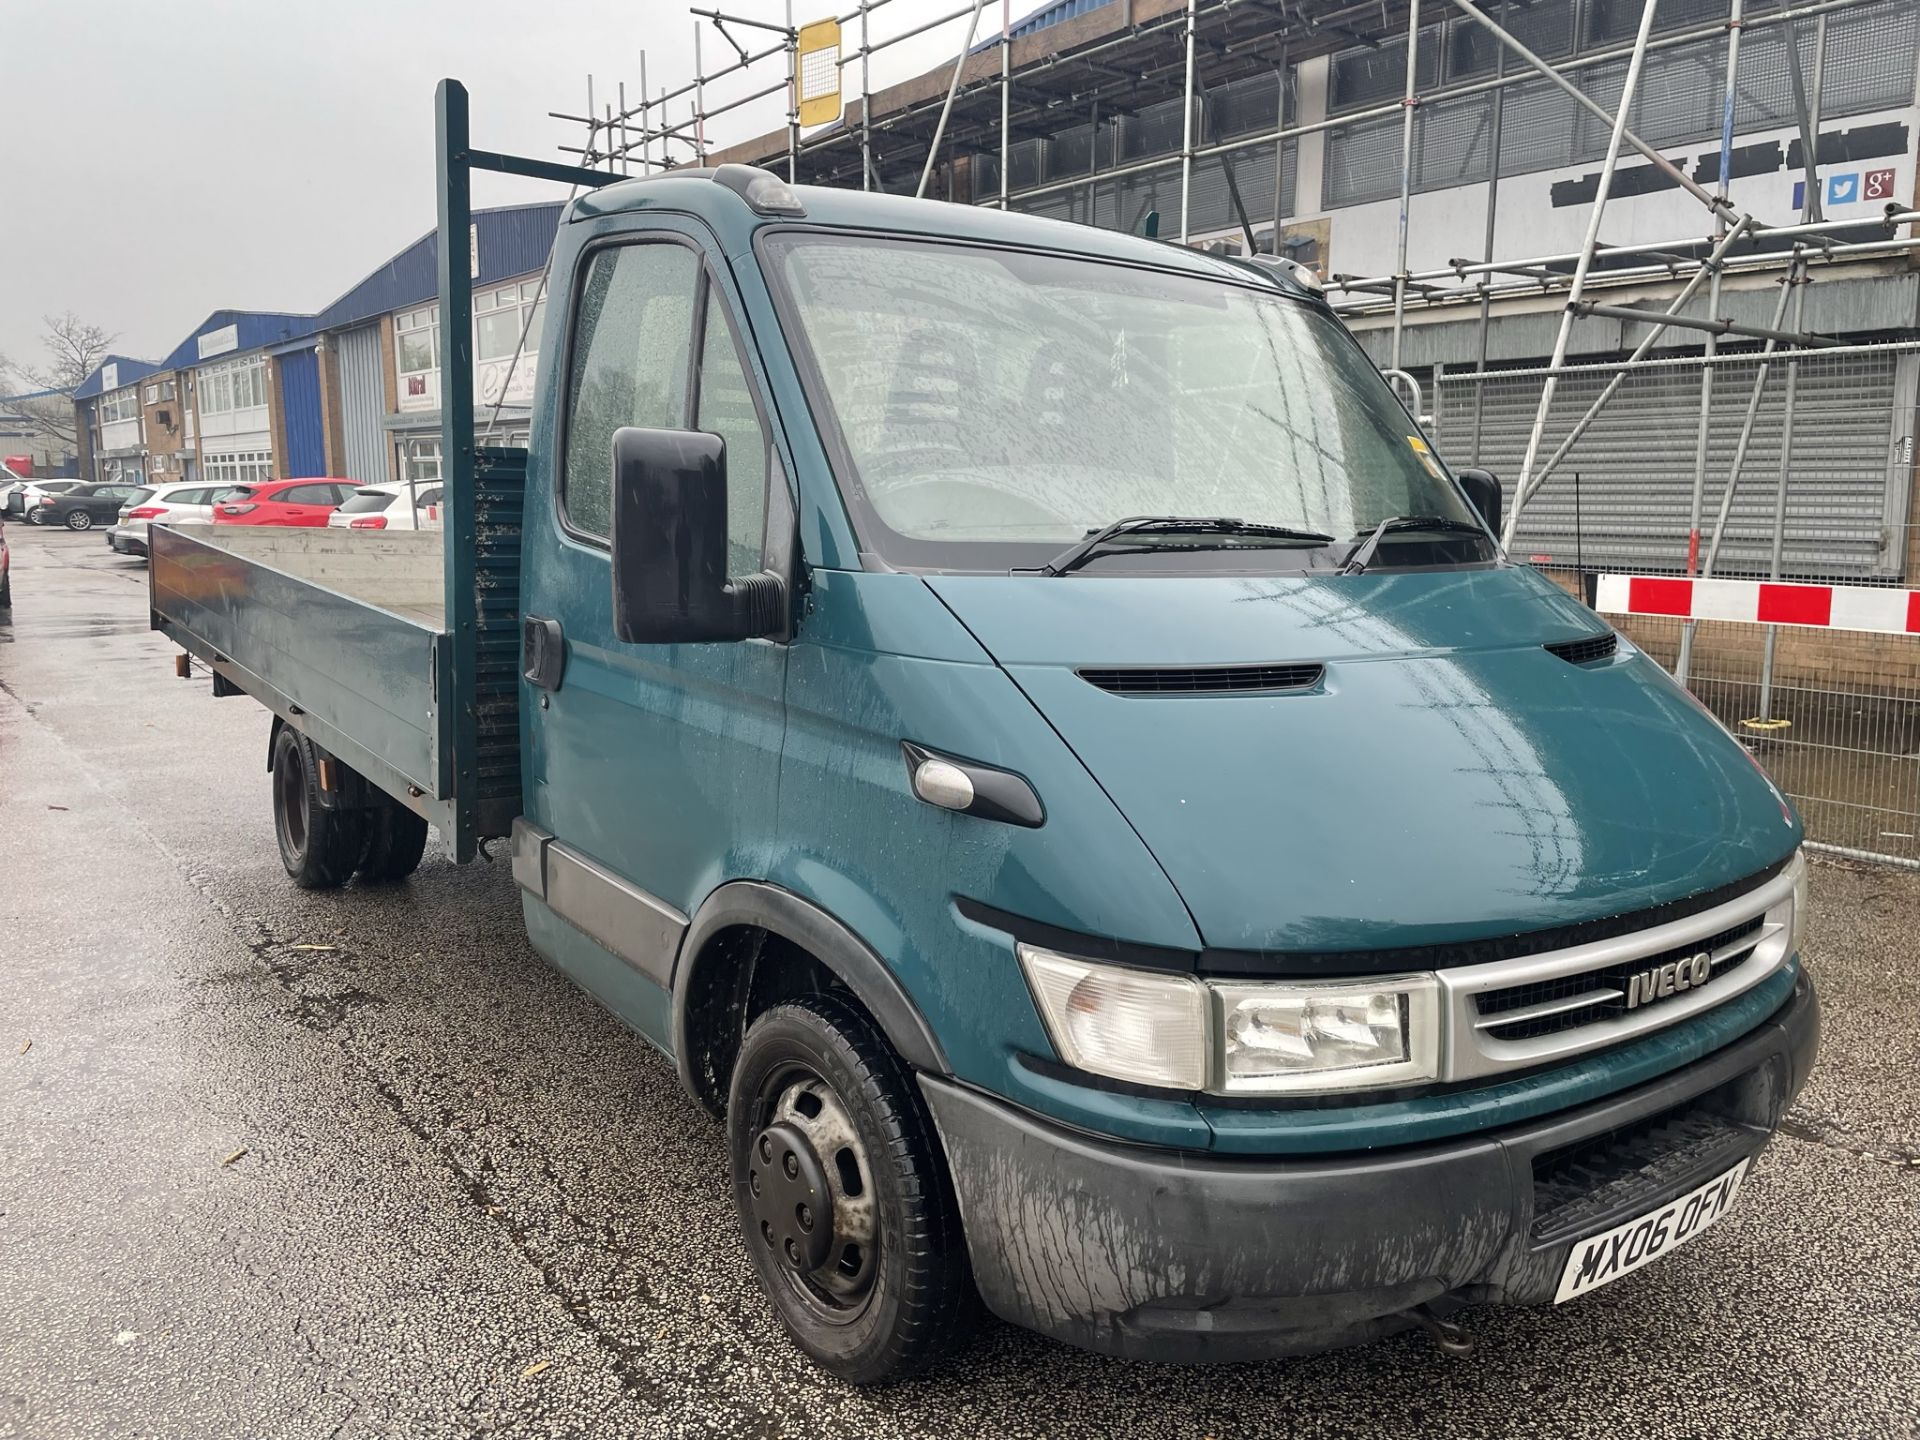 Iveco Daily 35 C12 LWB Dropside Lorry | MX06 OFN | 161,057 Miles